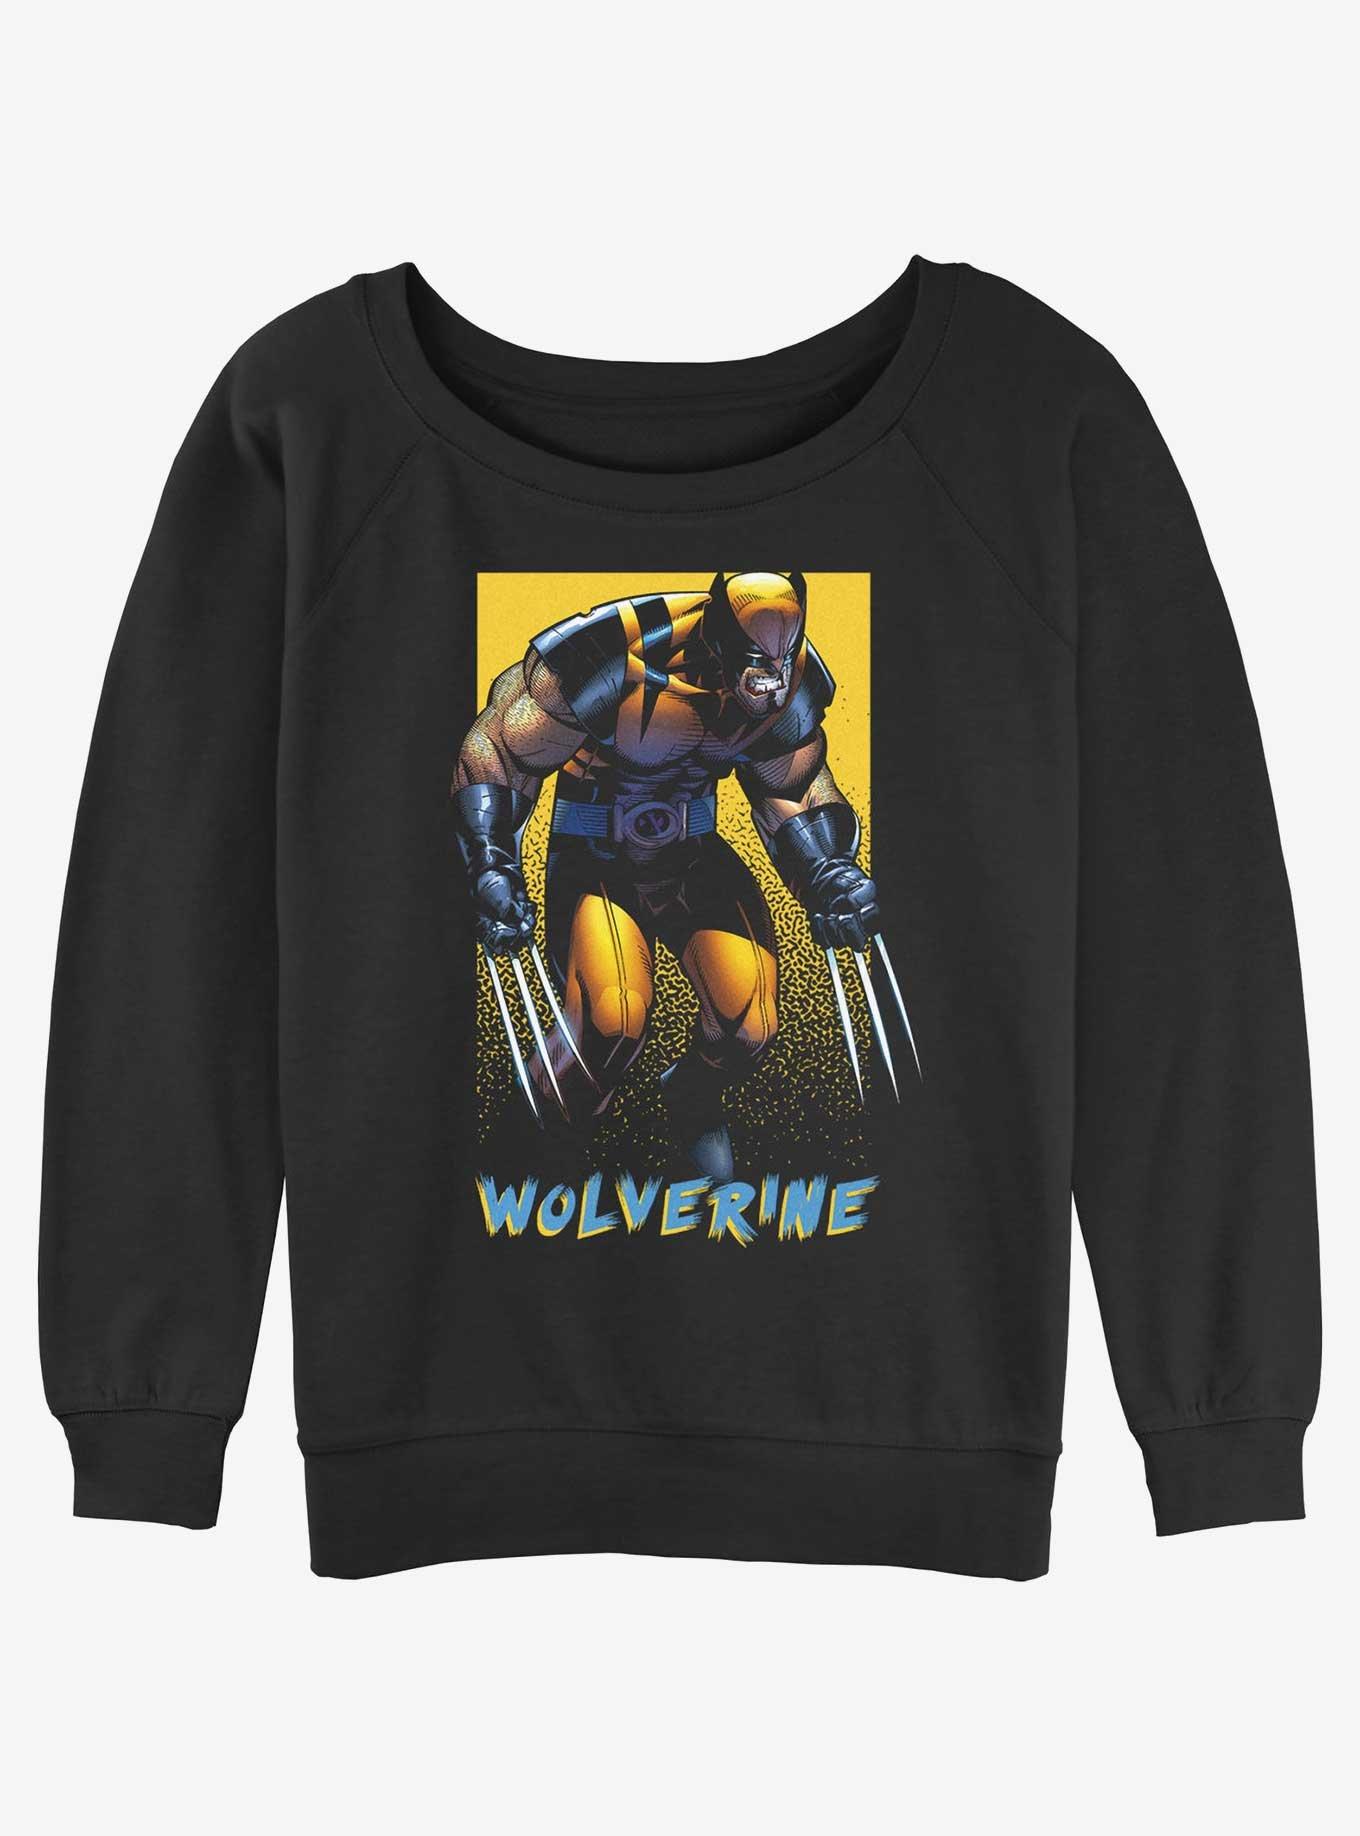 Wolverine Claws Out Poster Womens Slouchy Sweatshirt, BLACK, hi-res